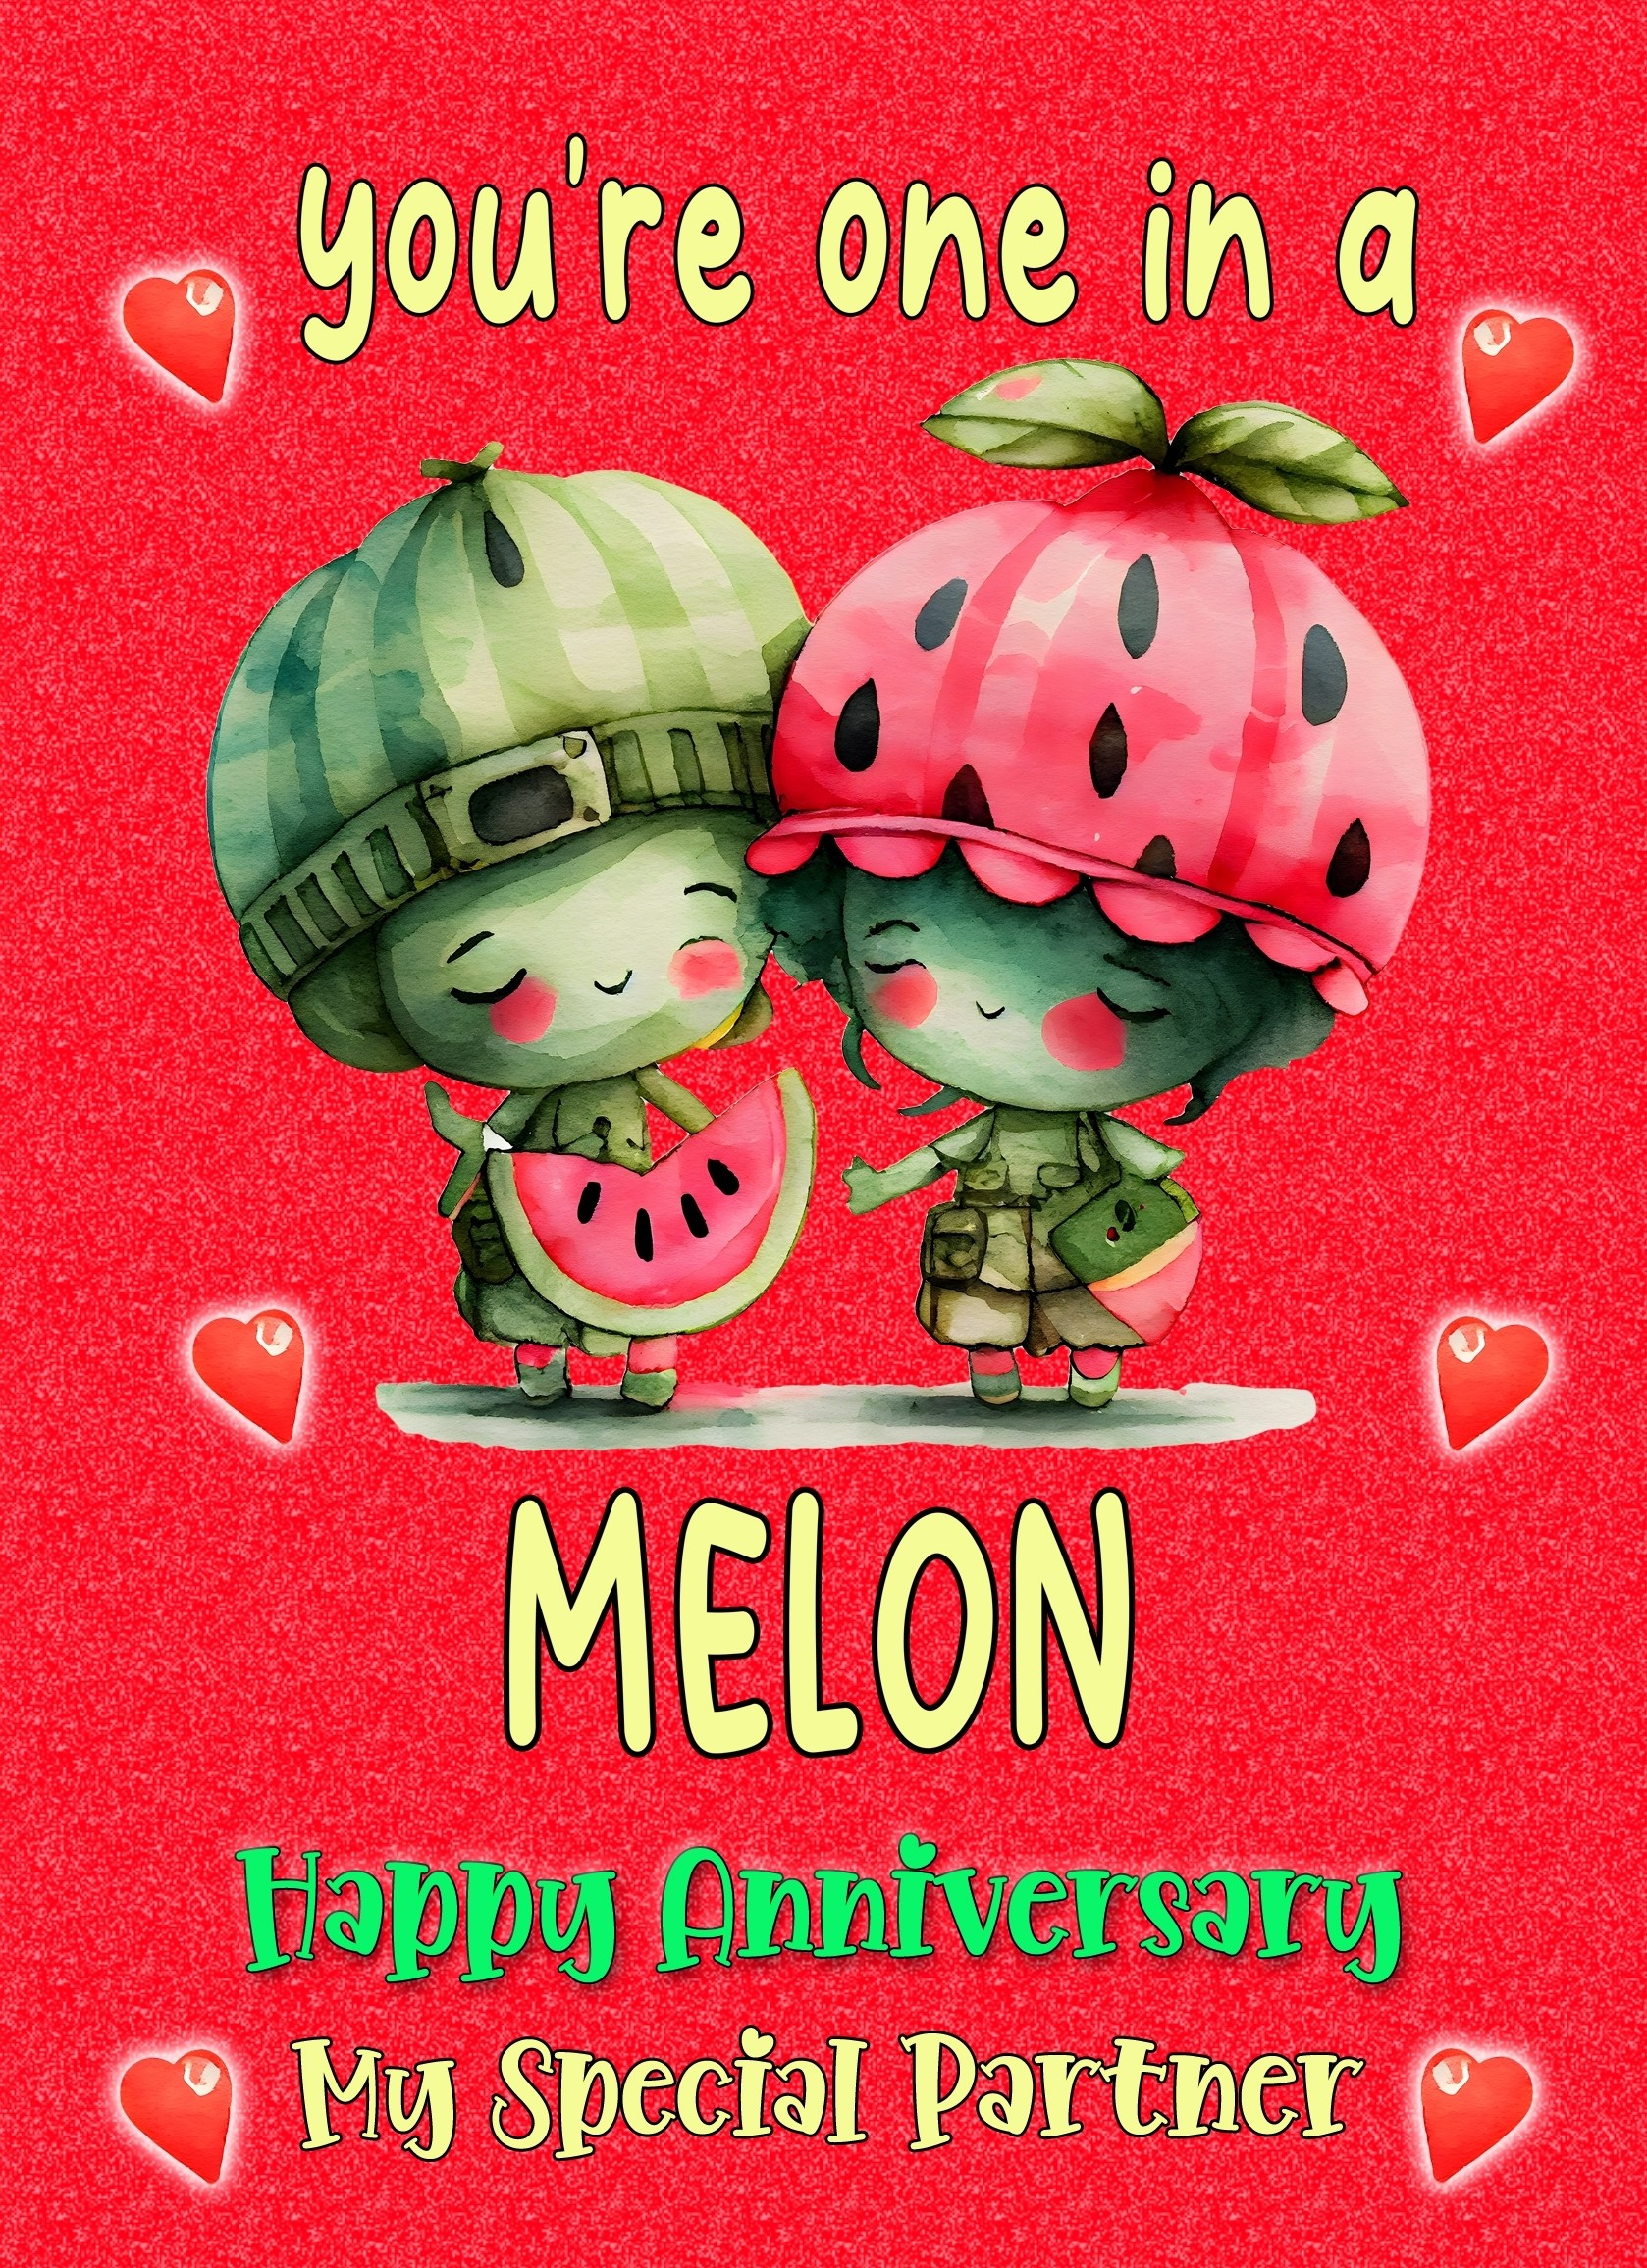 Funny Pun Romantic Anniversary Card for Partner (One in a Melon)